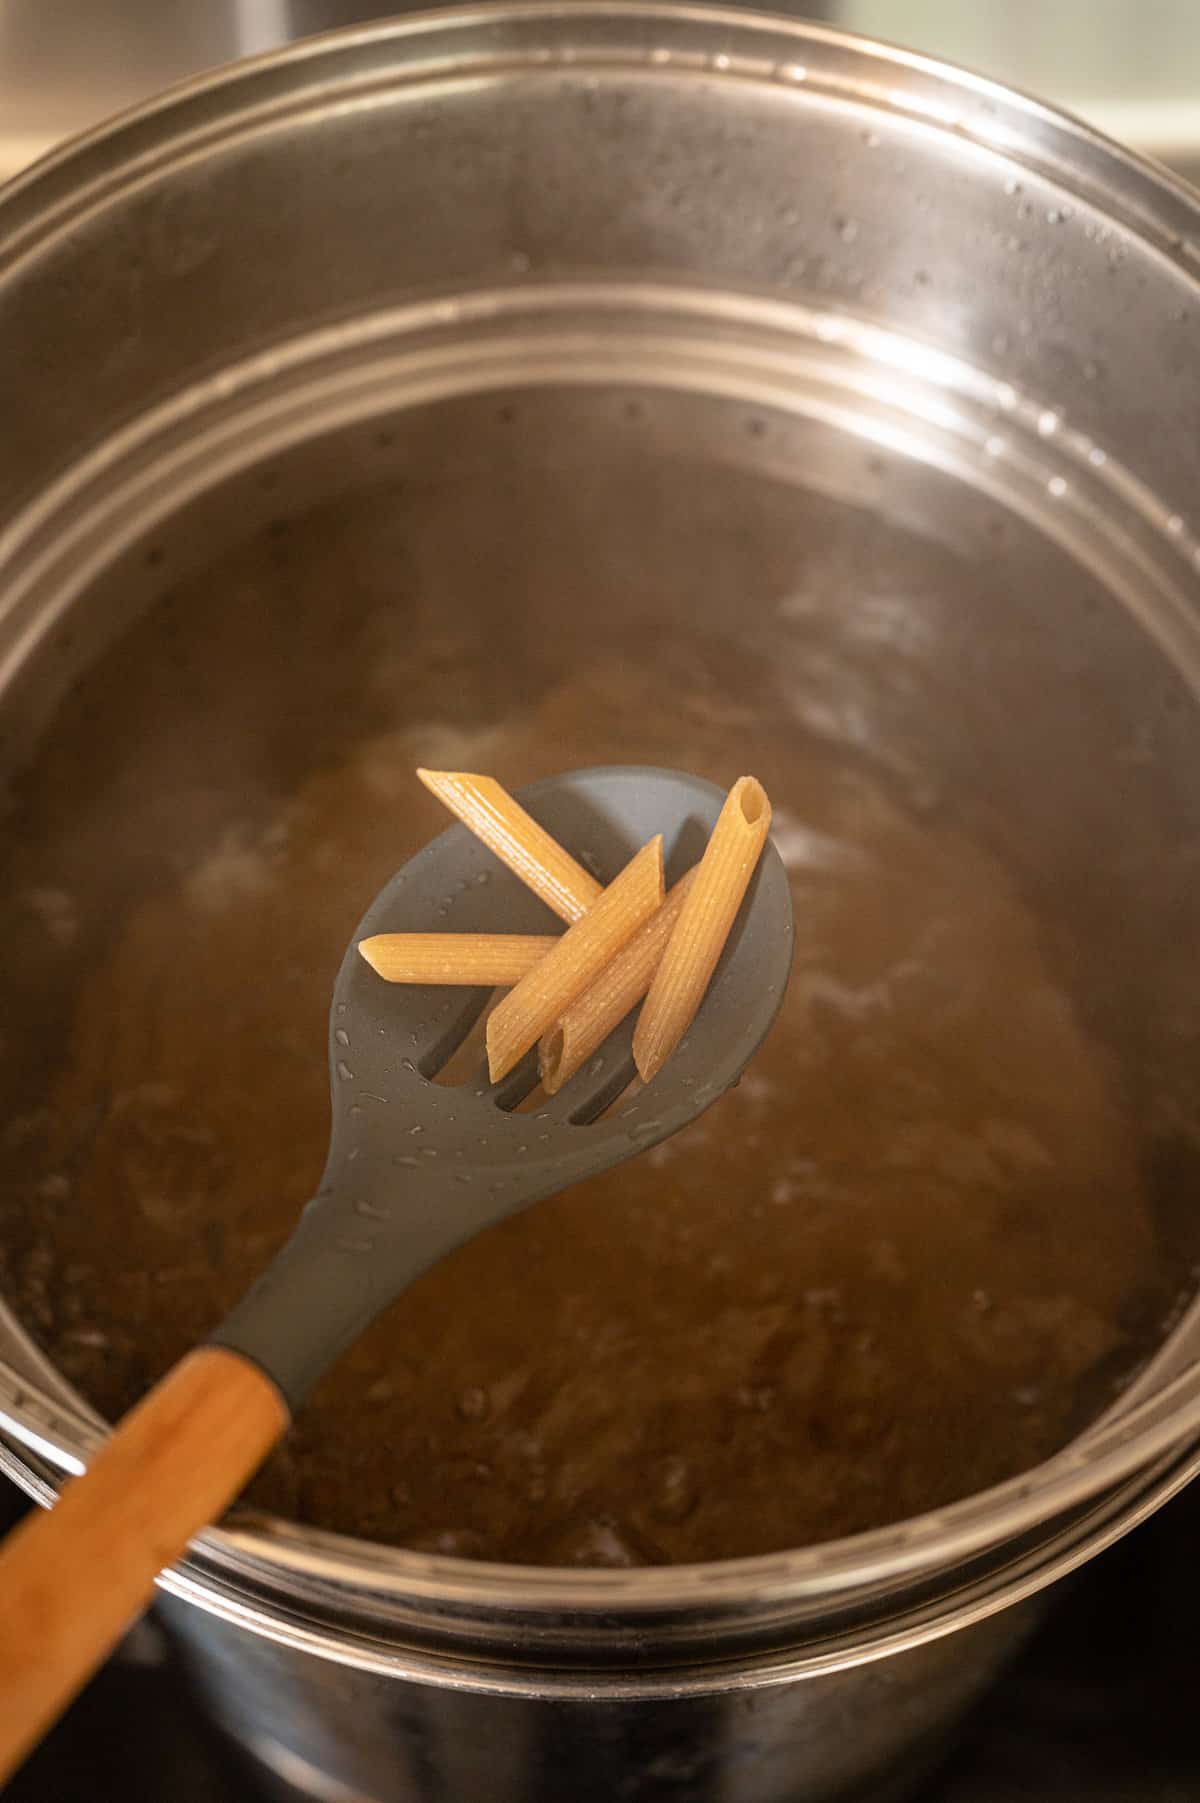 Slotted spoon with penne pasta on it above a pot of boiling penne.